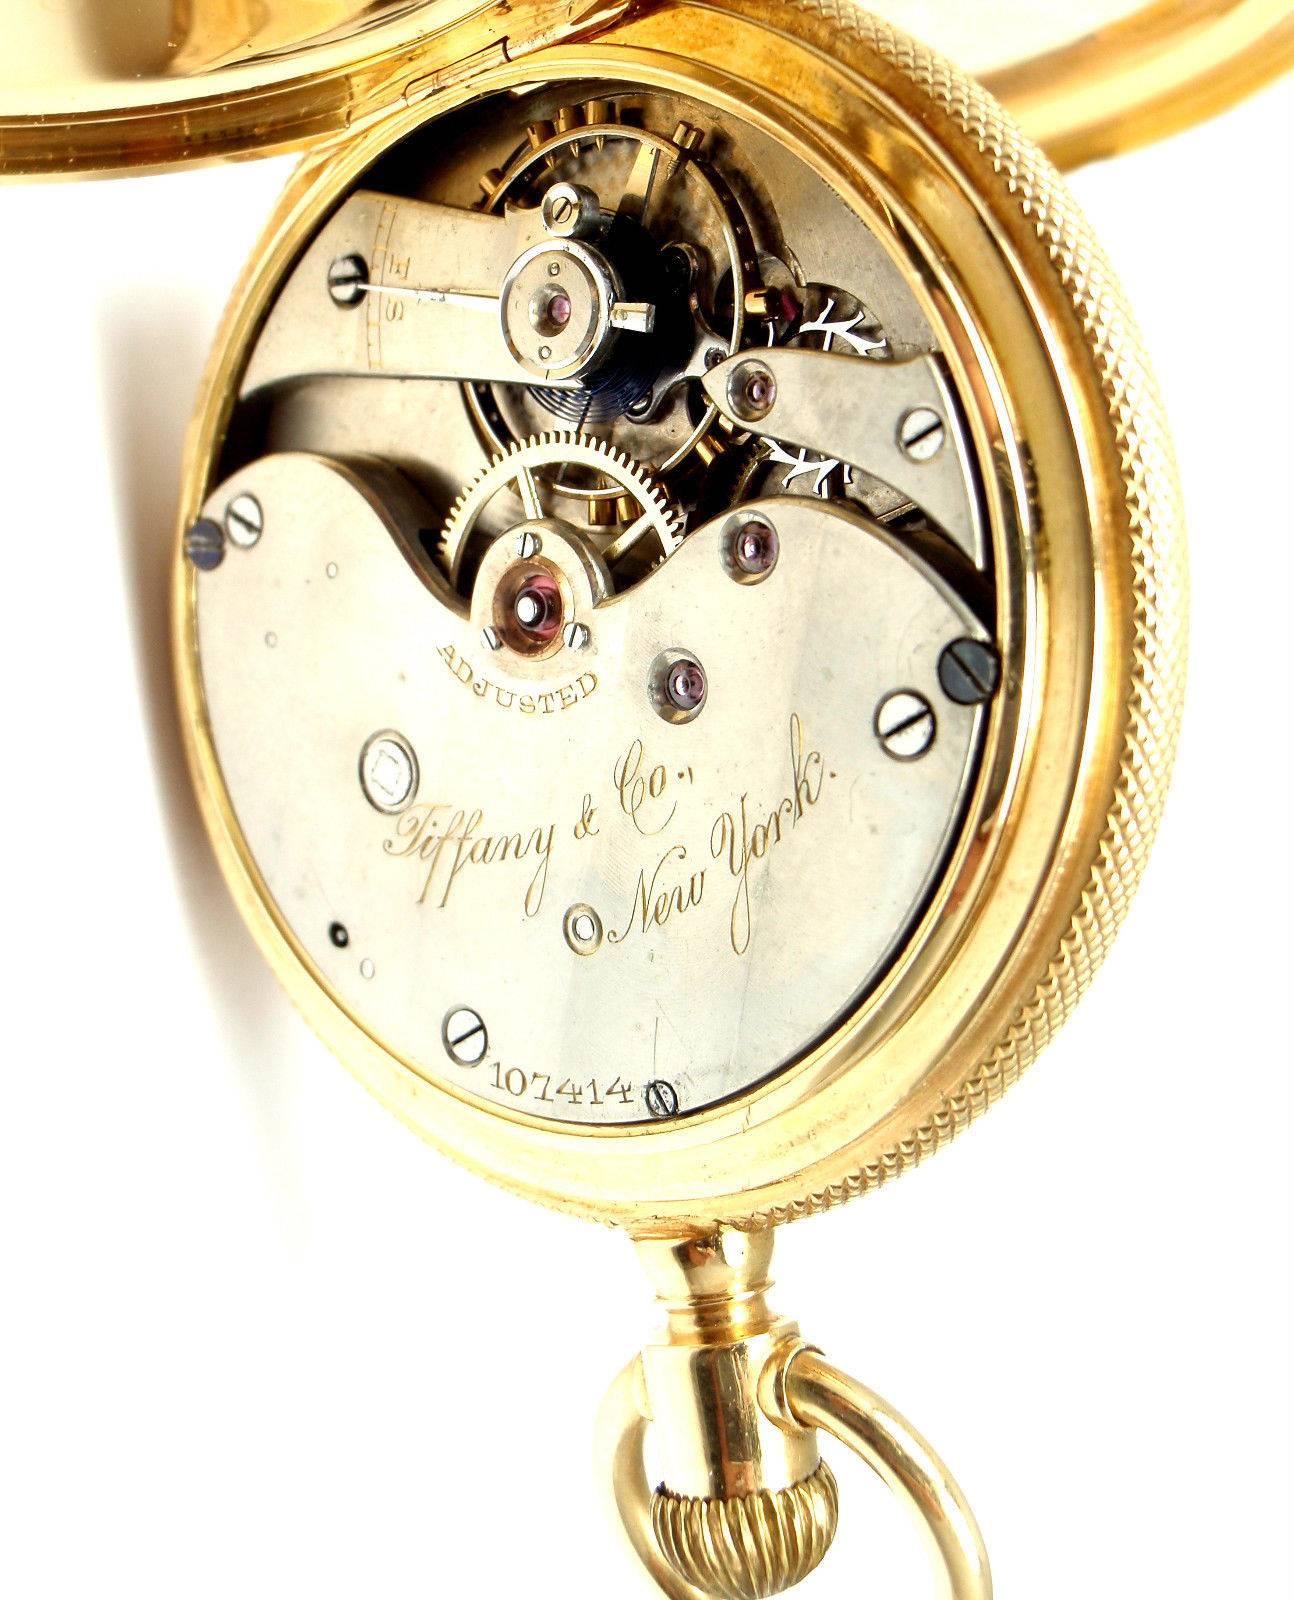 18k Yellow Gold Full Hunter Case Pocket Watch by Tiffany & Co. 
This watch has a solid 18k yellow gold case.
Works great, fully functional, triple signed.
Details: 
Case Size: 51mm
Weight: 113.8 grams
Movement: Mechanical Hand Winding
Stamped